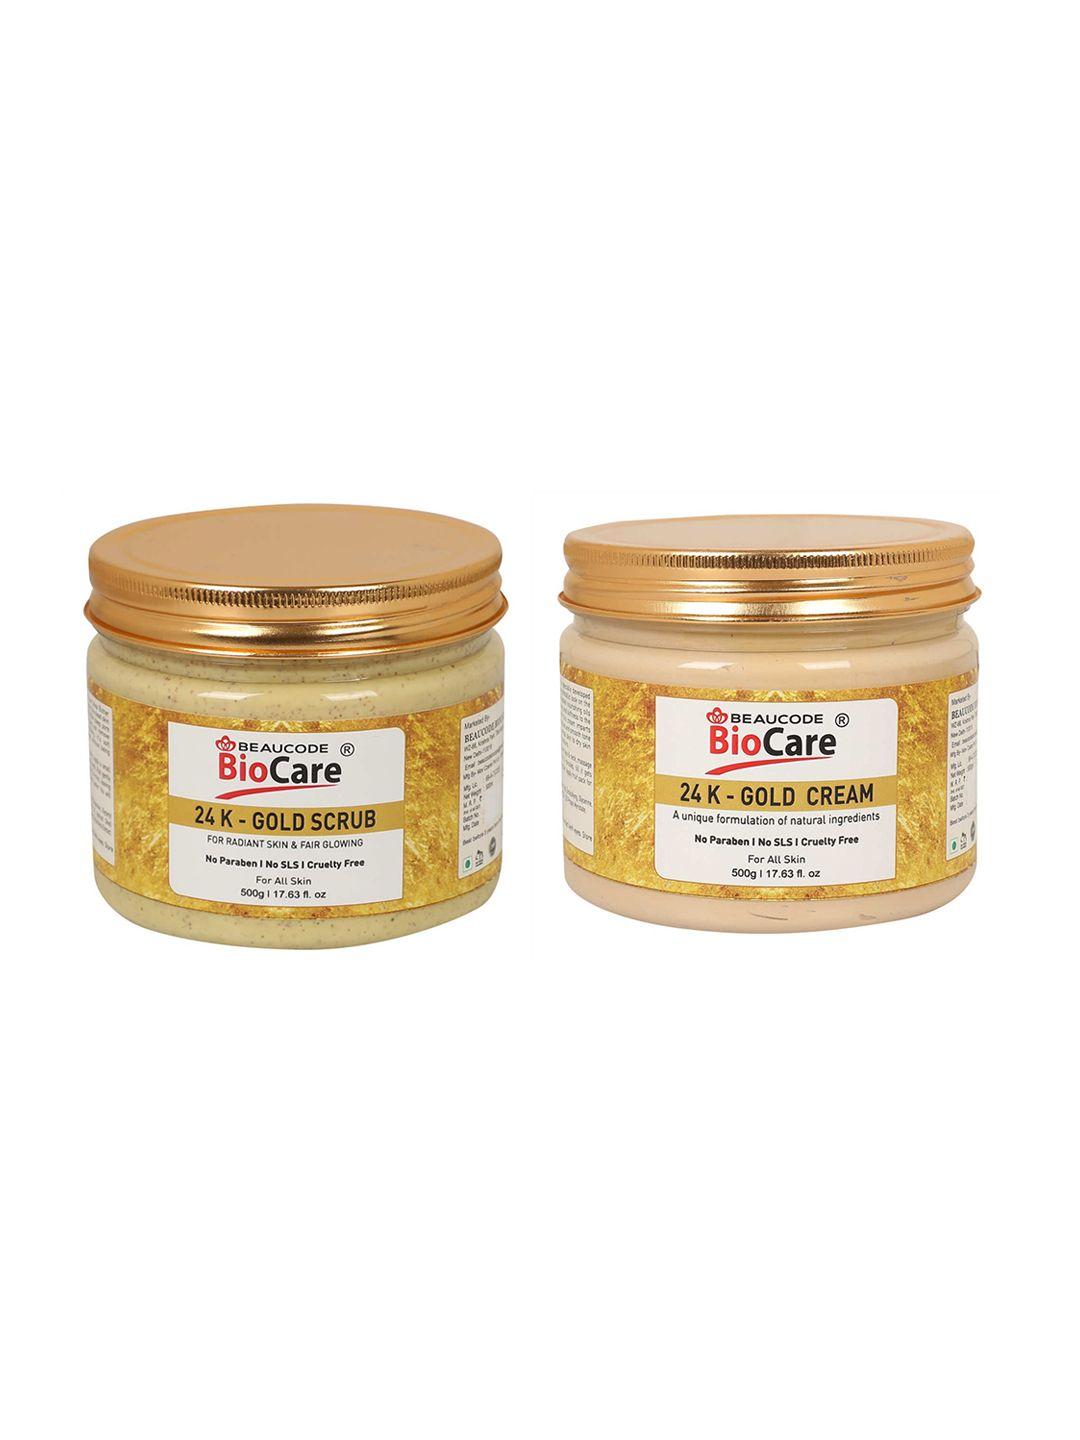 beaucode-biocare-set-of-2-24k-gold-face-and-body-scrub-and-cream-1kg